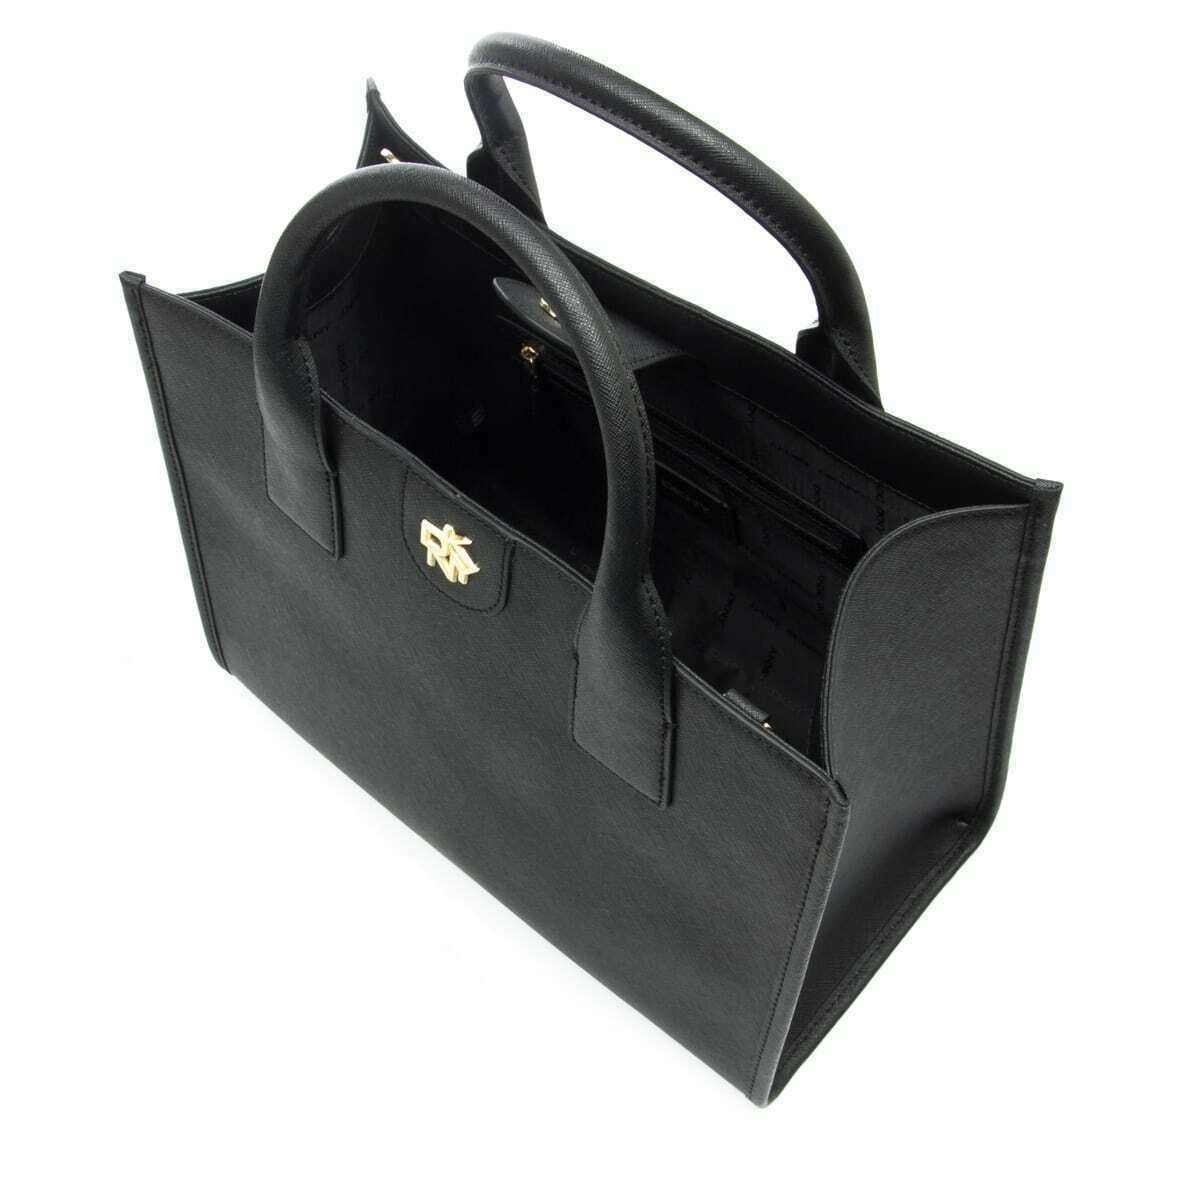 Handtasche DKNY Carol Tote R22A1S41 Blk/Gold, I can t stop thinking about  adding a Kelly bag to my collection